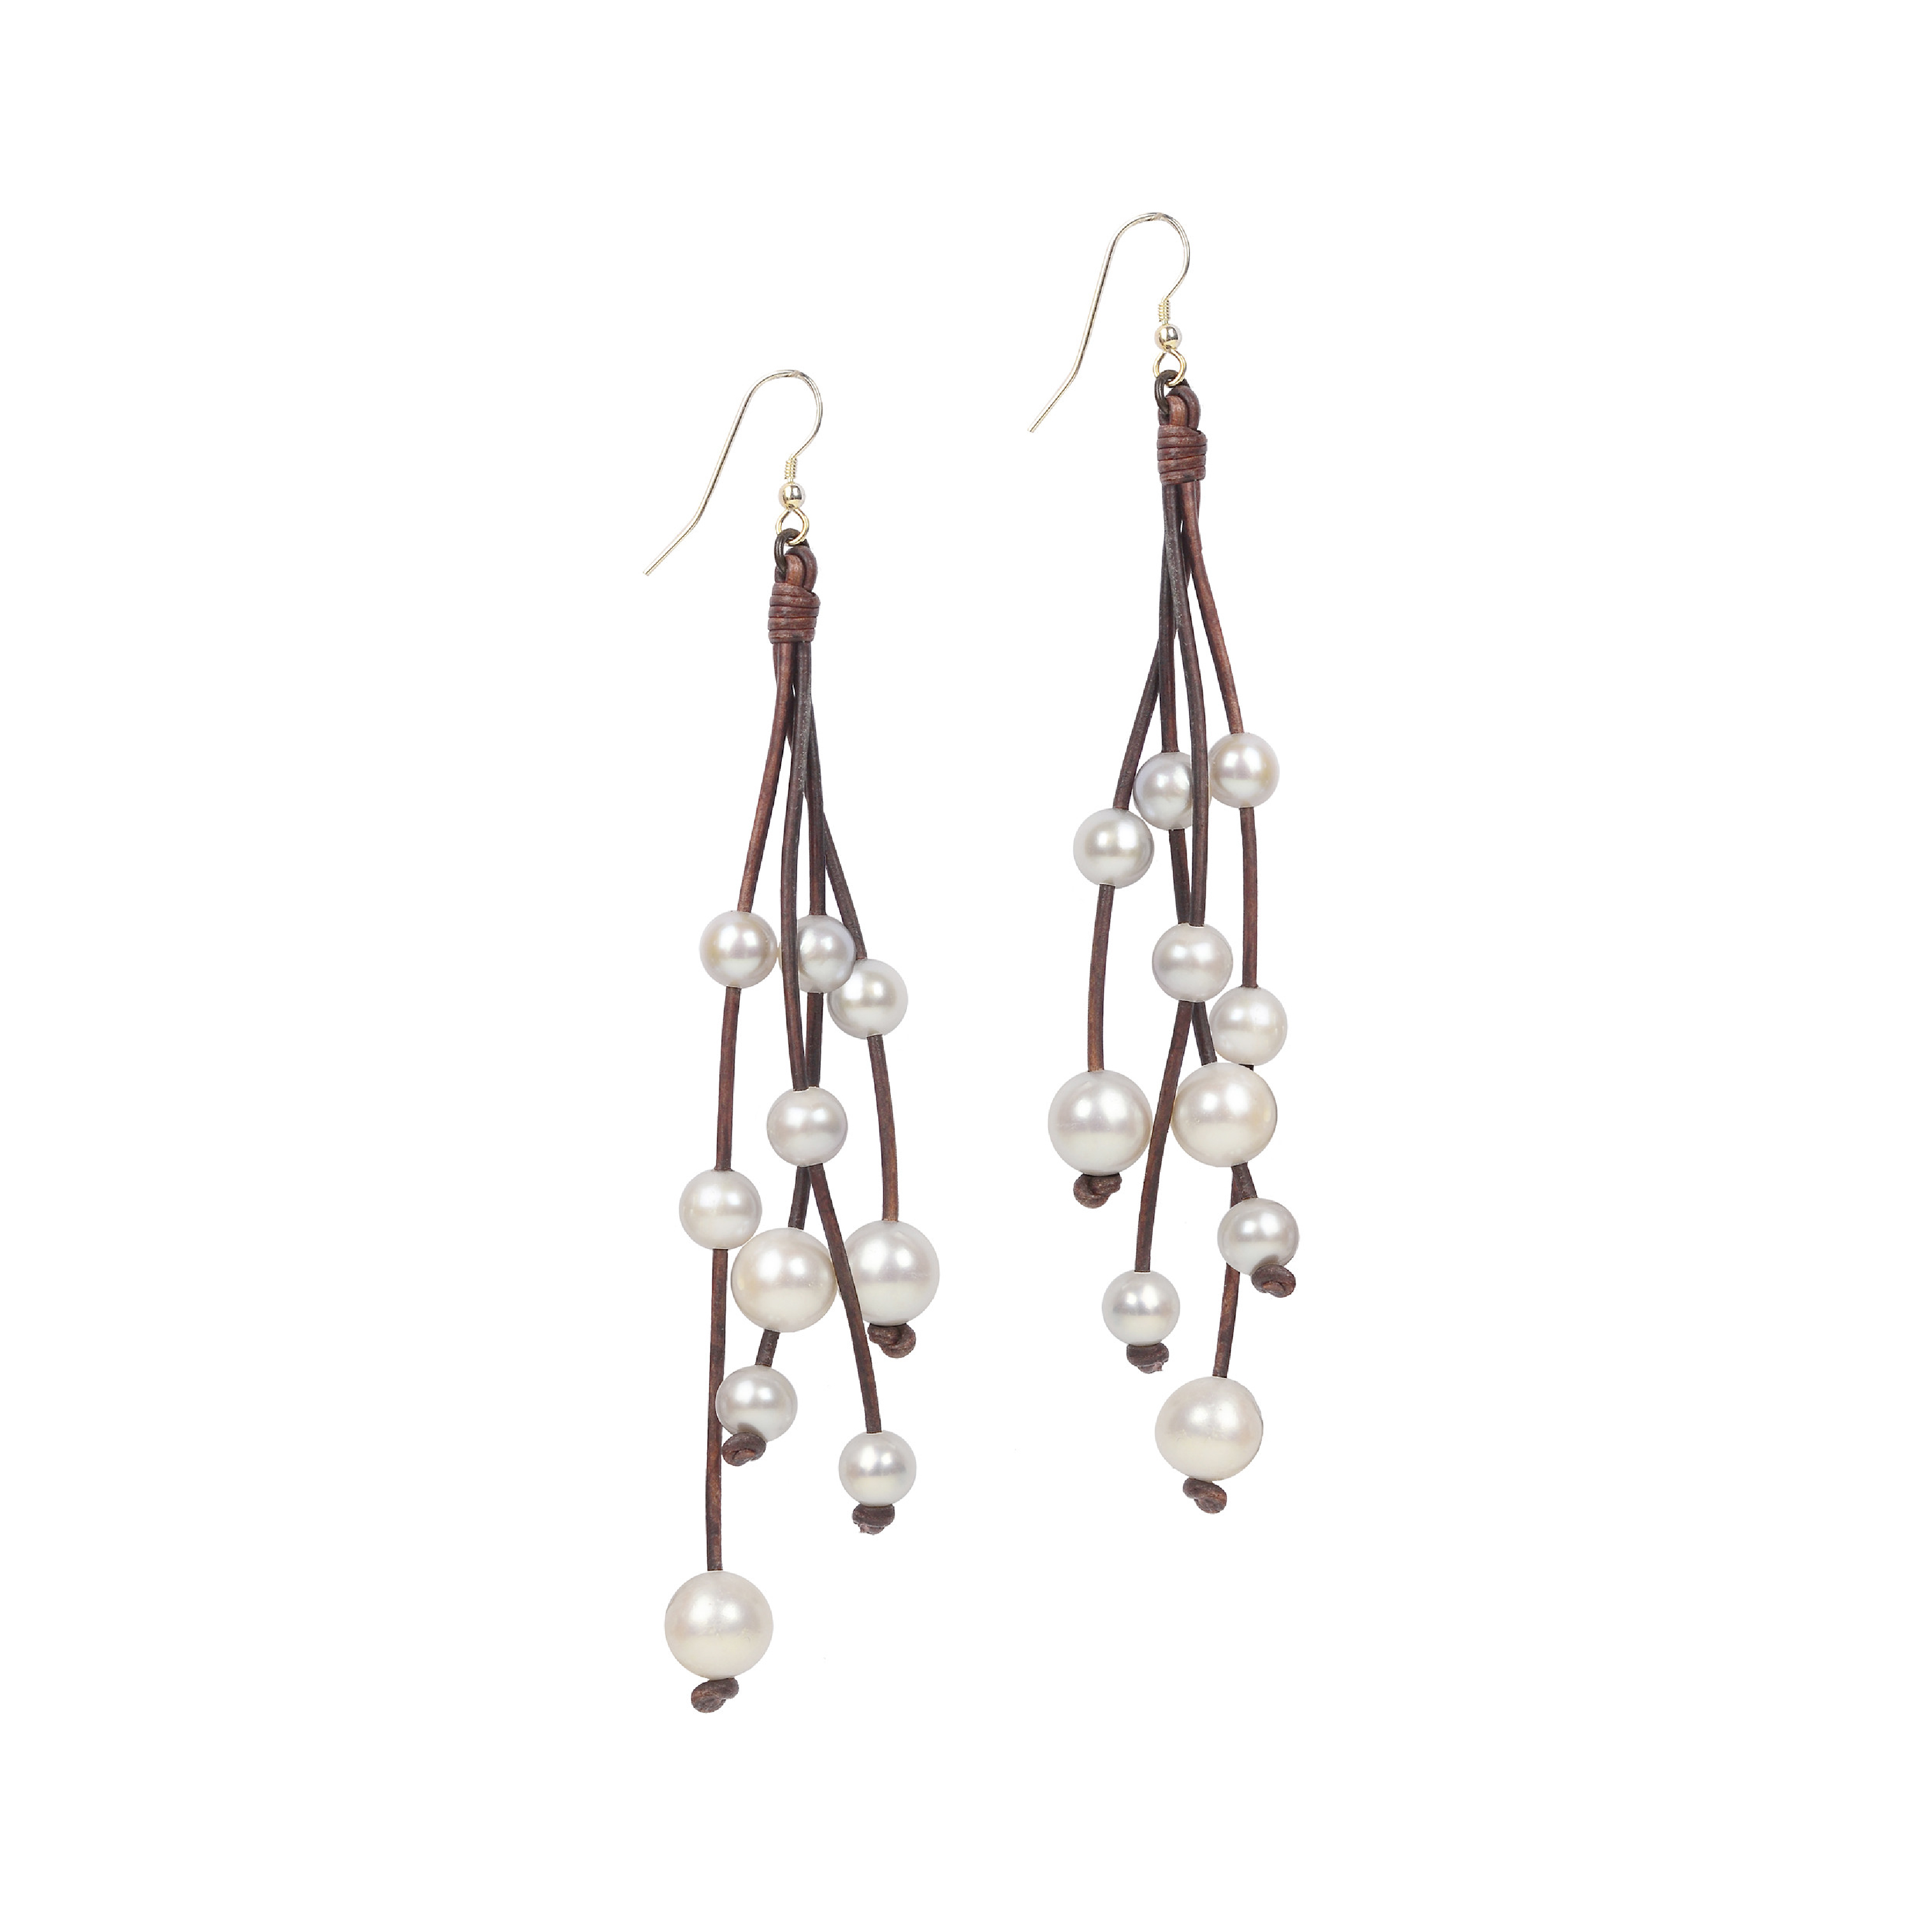 VINCENT PEACH CONSTELLATION TASSEL EARRINGS WITH FRESHWATER PEARLS AND PREMIUM LEATHER